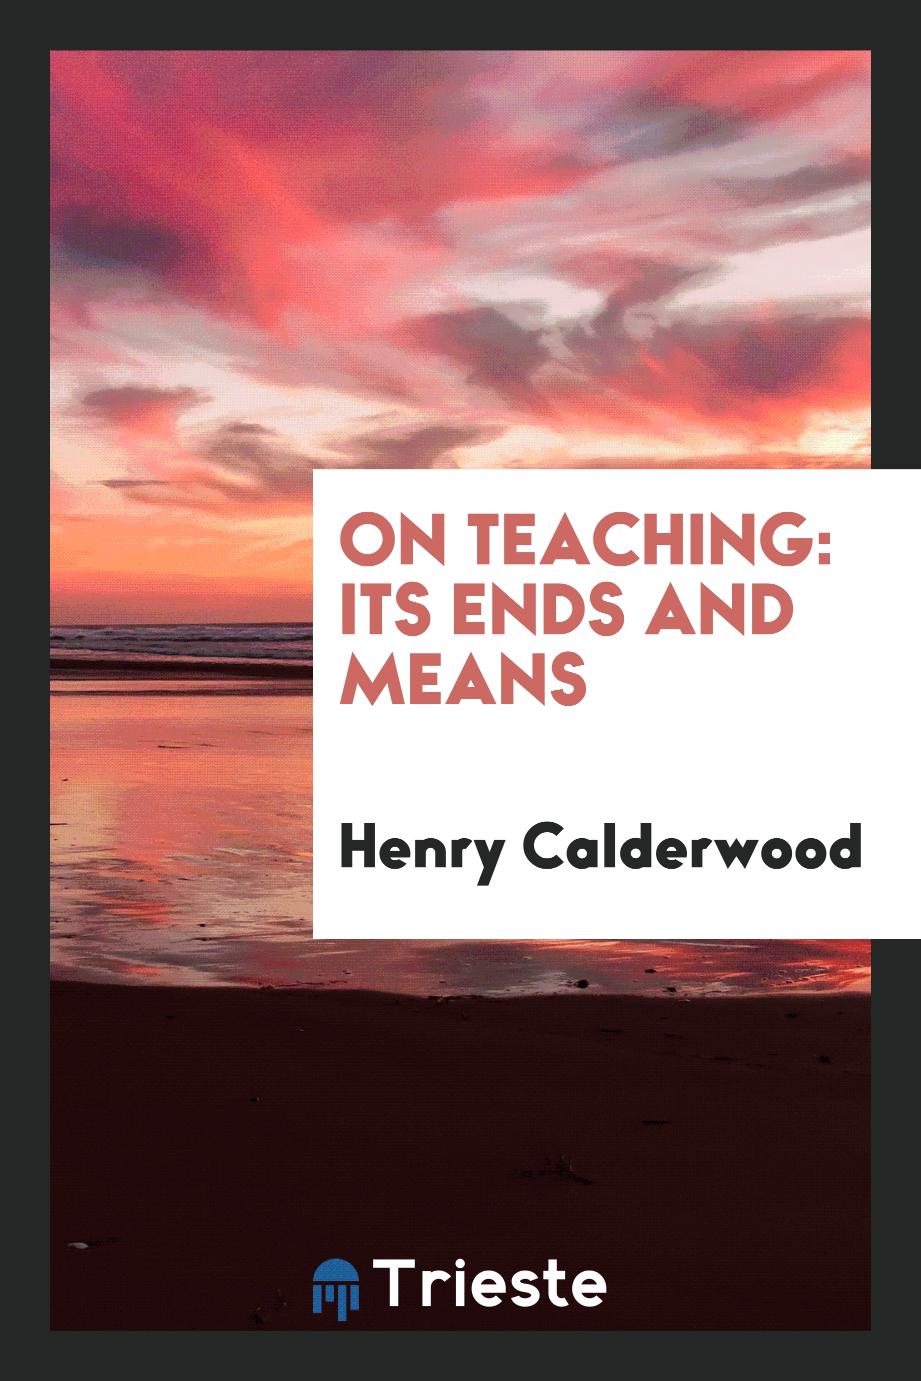 On teaching: its ends and means